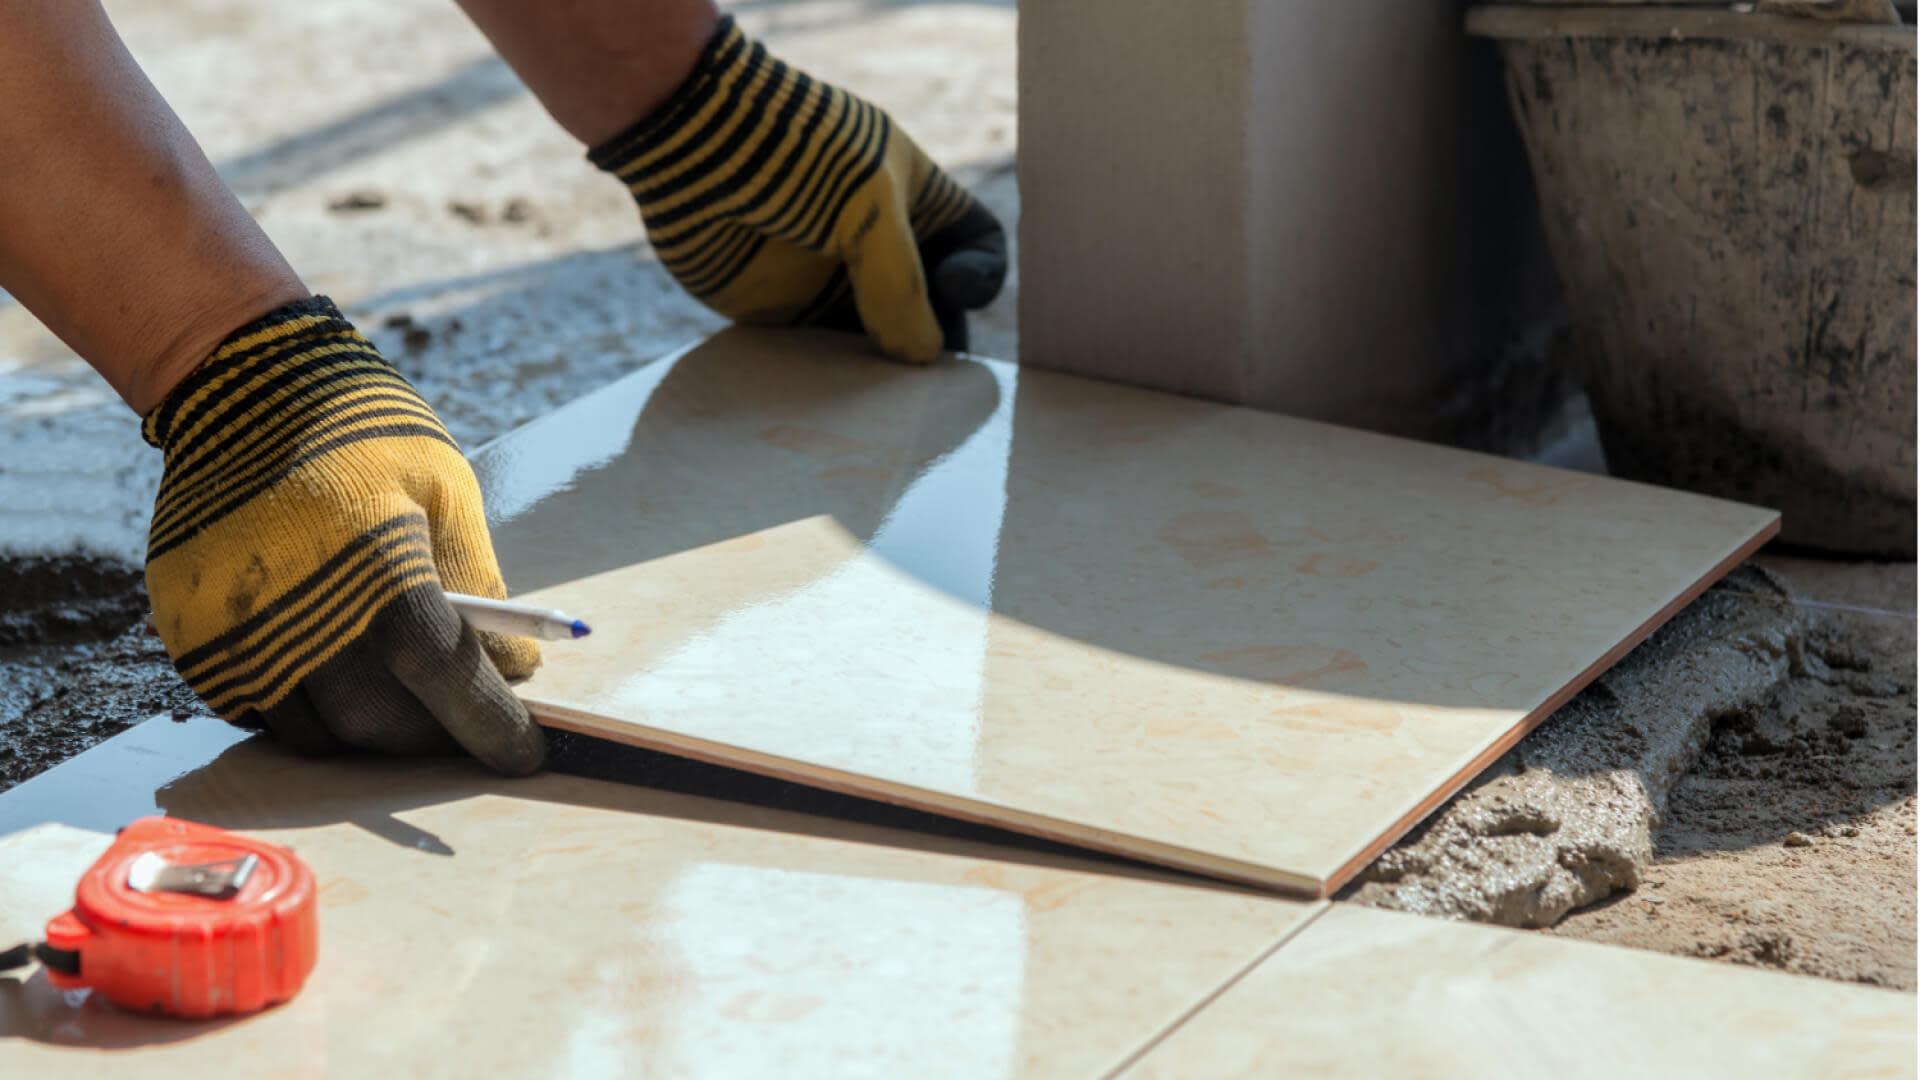 Construction worker placing a tile on the floor